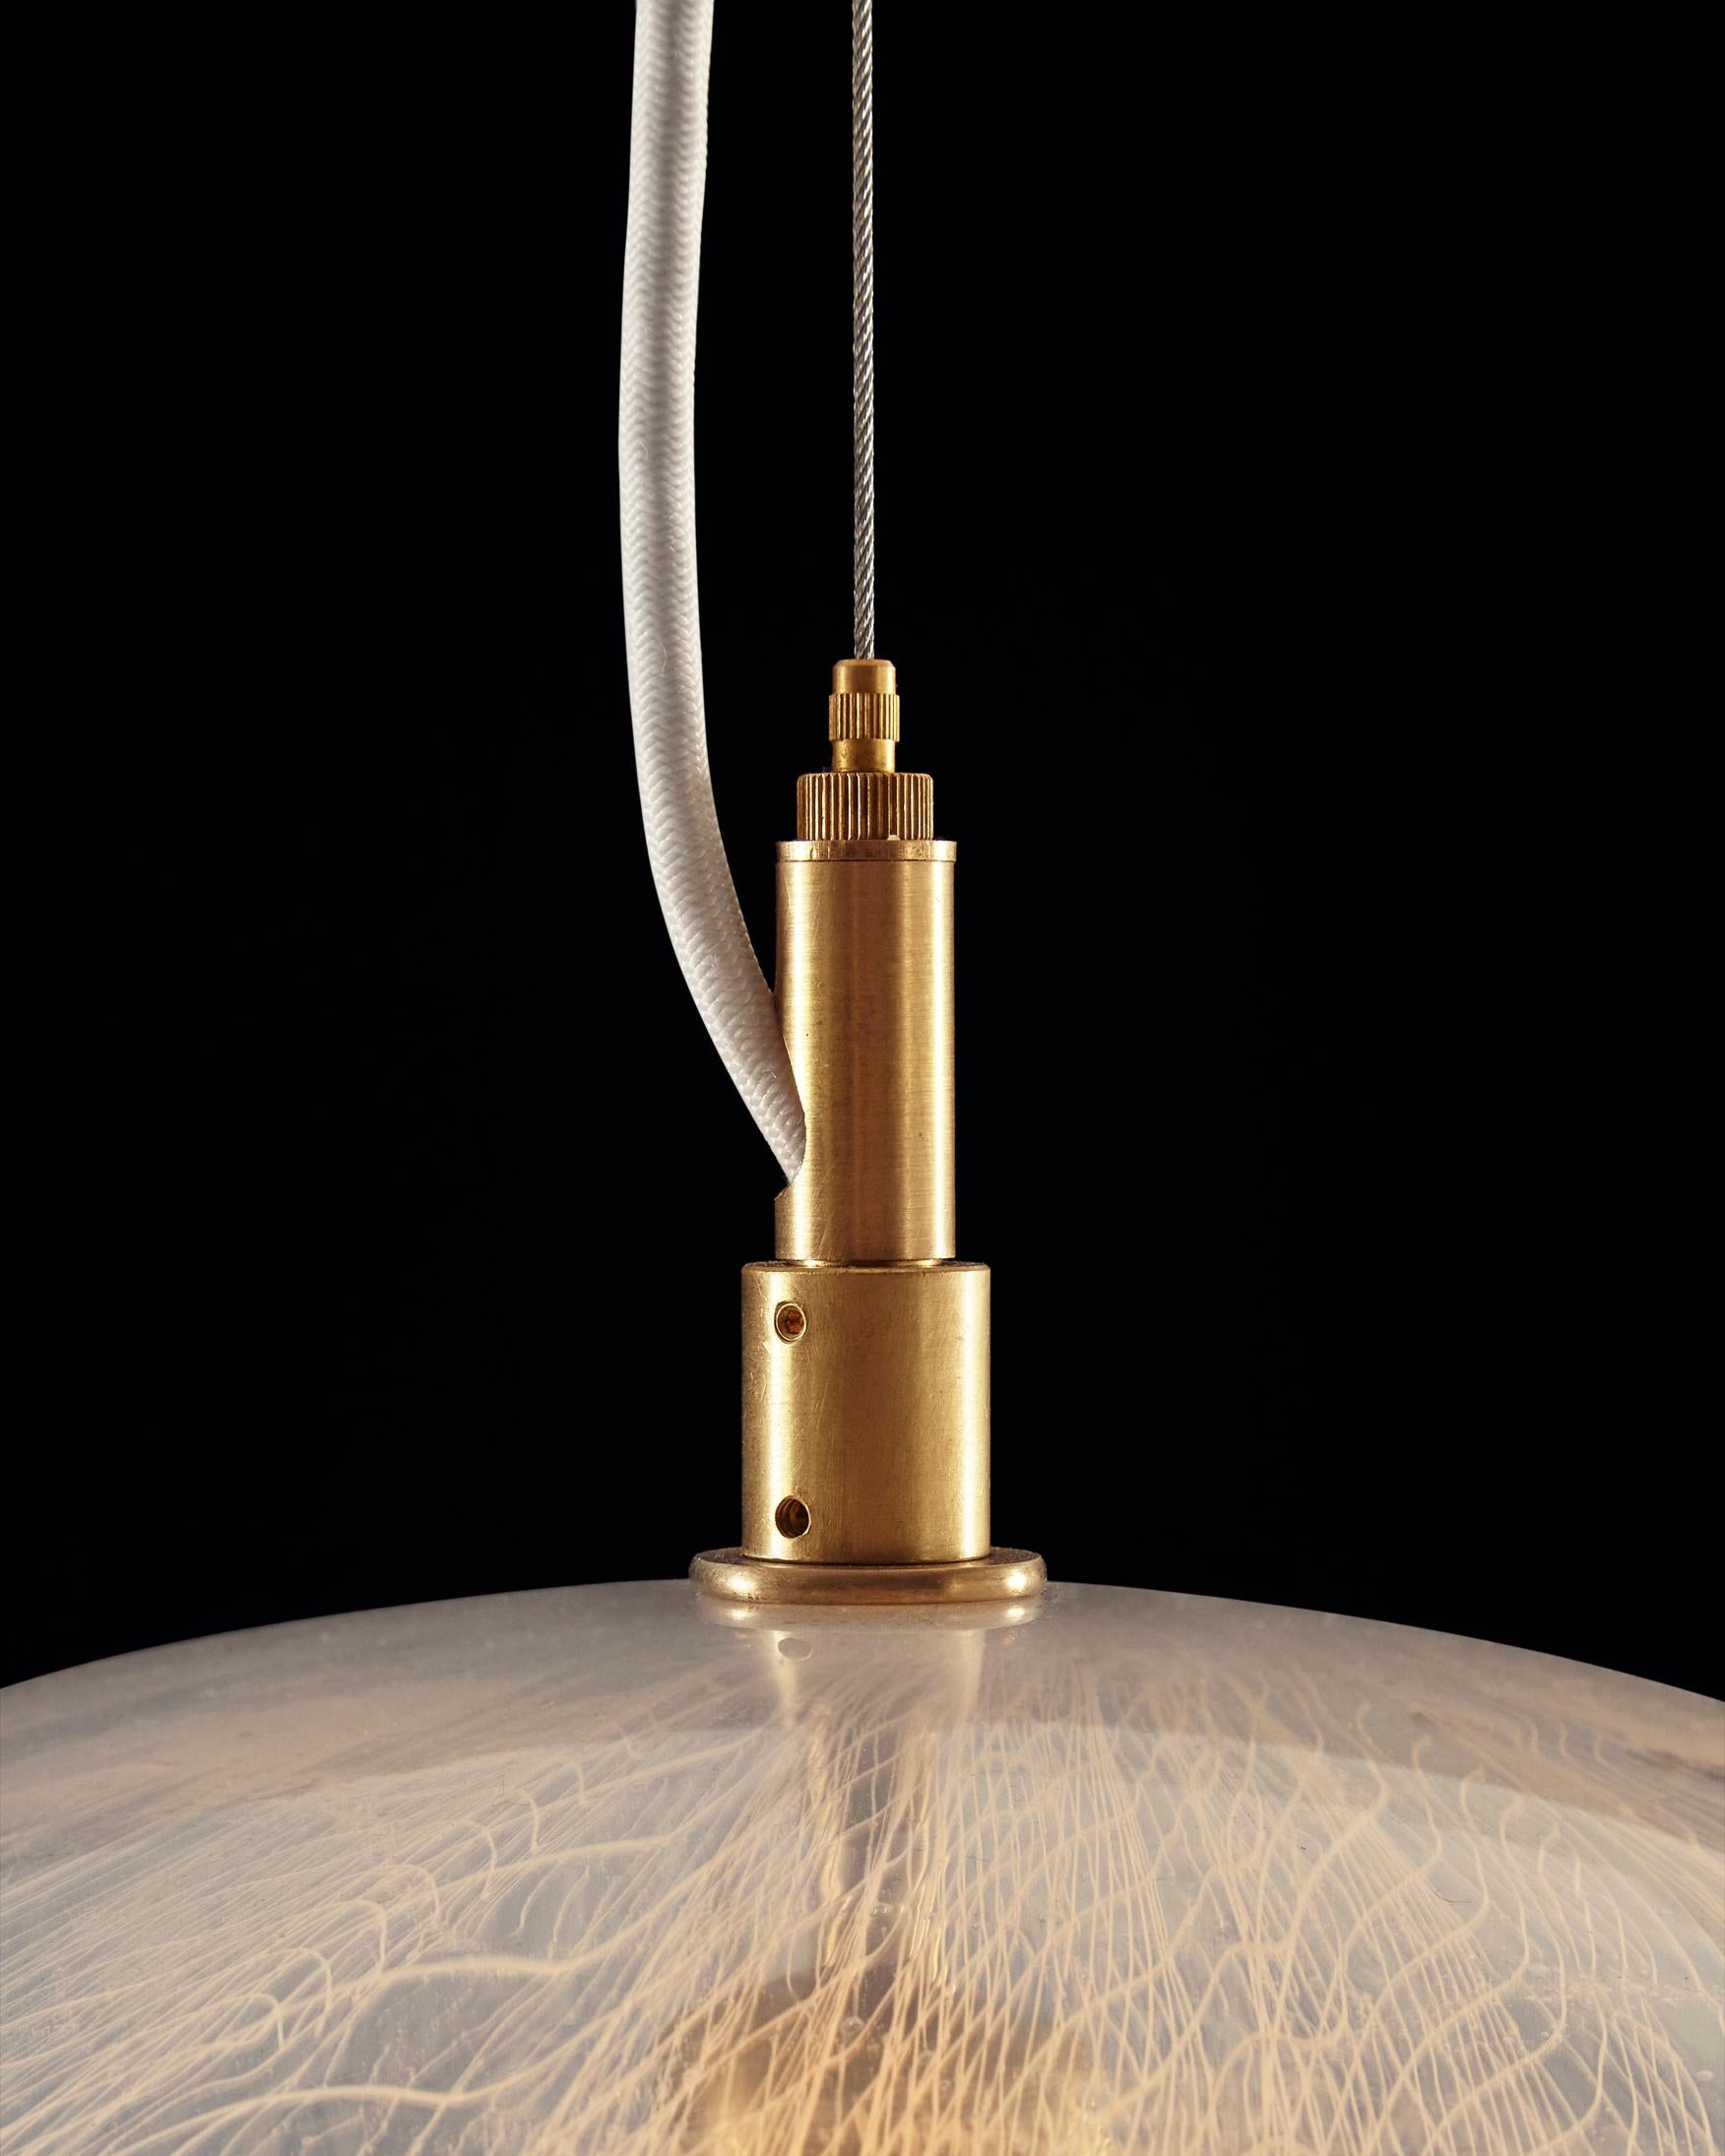 Contemporary Unique Illuminated Sculptural Pendant by Jeff Zimmerman and James Mongrain